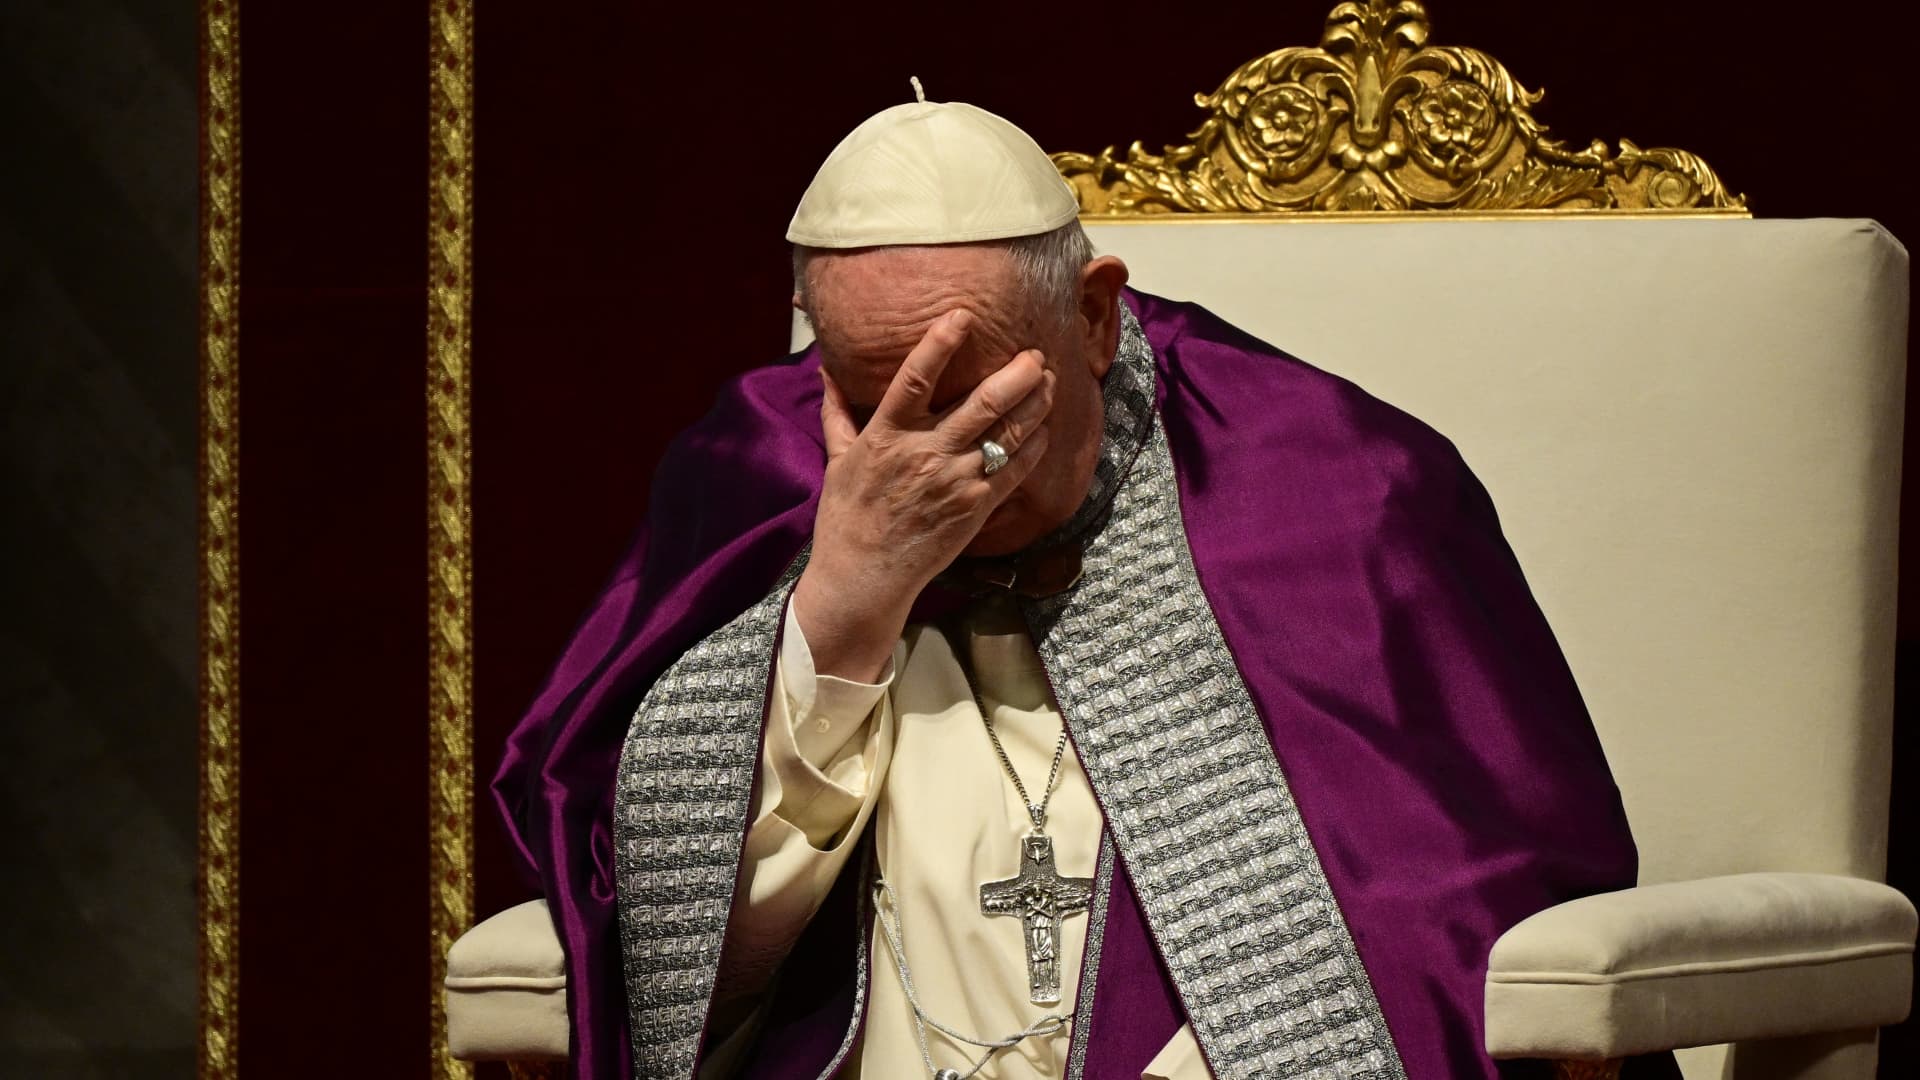 Pope Francis prays during a penitential celebration service at St. Peter's Basilica on March 25, 2022 in The Vatican, during which he is to consecrates Russia and Ukraine to the Immaculate Heart of Mary.